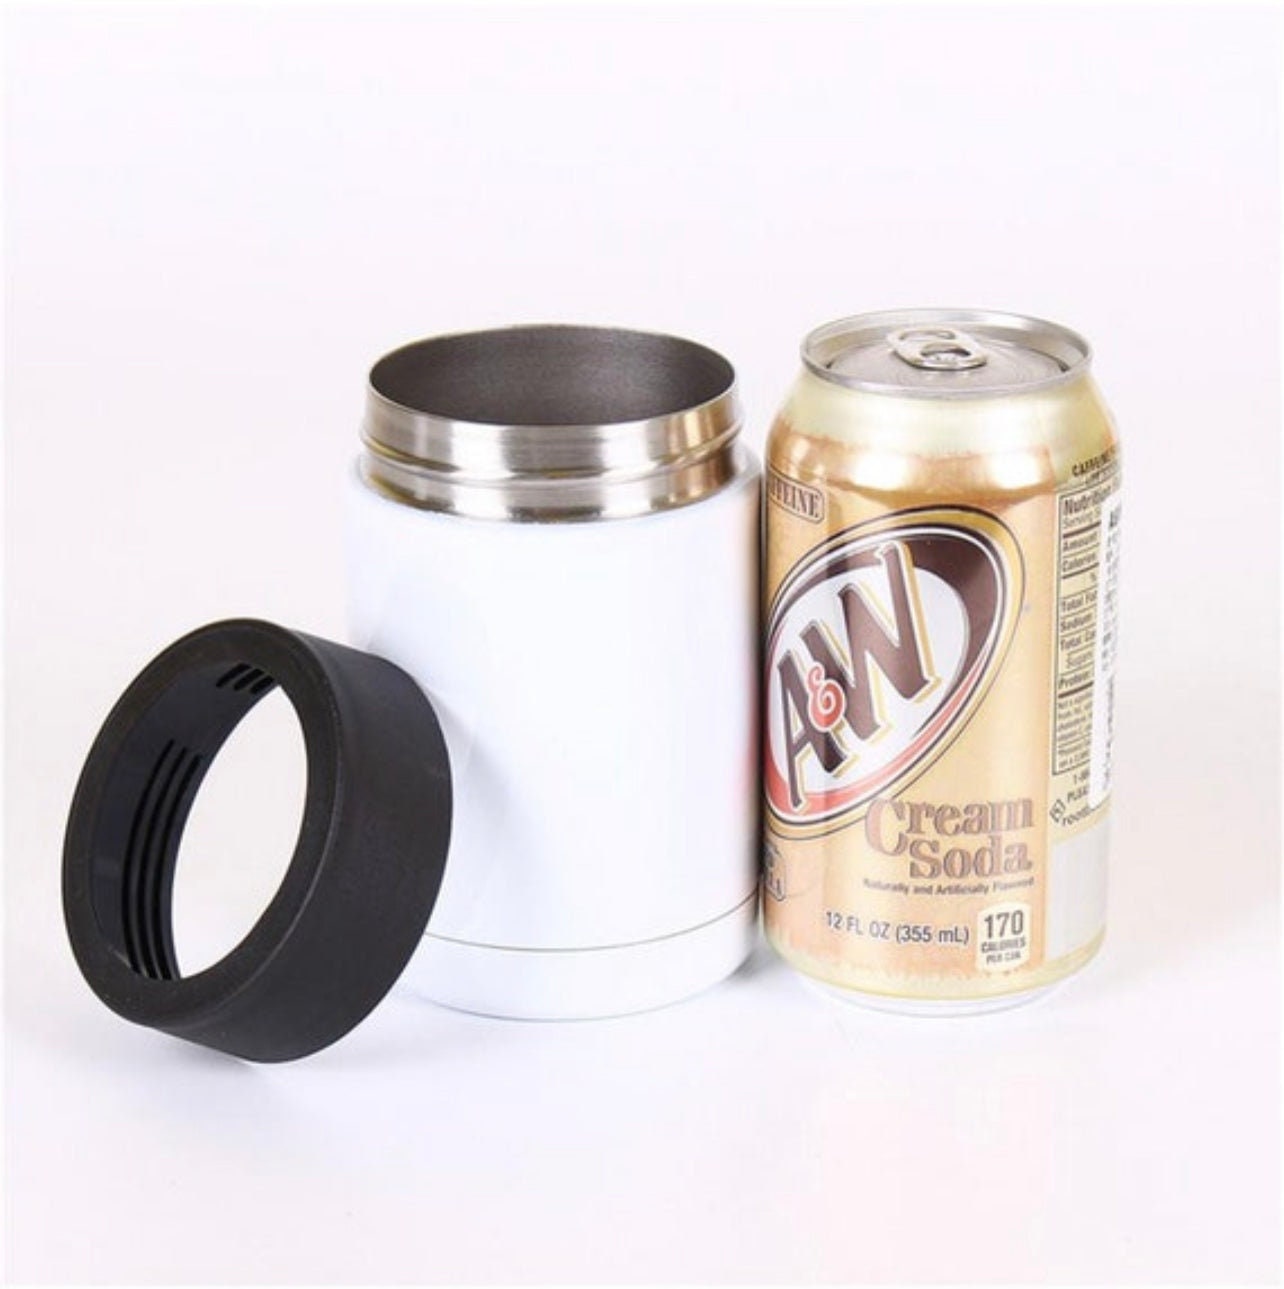 Buy Wholesale China 4 In 1 Blank Sublimation 12oz Can Cooler Stainless  Steel Beer Can Holder With Lid & 4 In 1 Can Cooler at USD 2.08